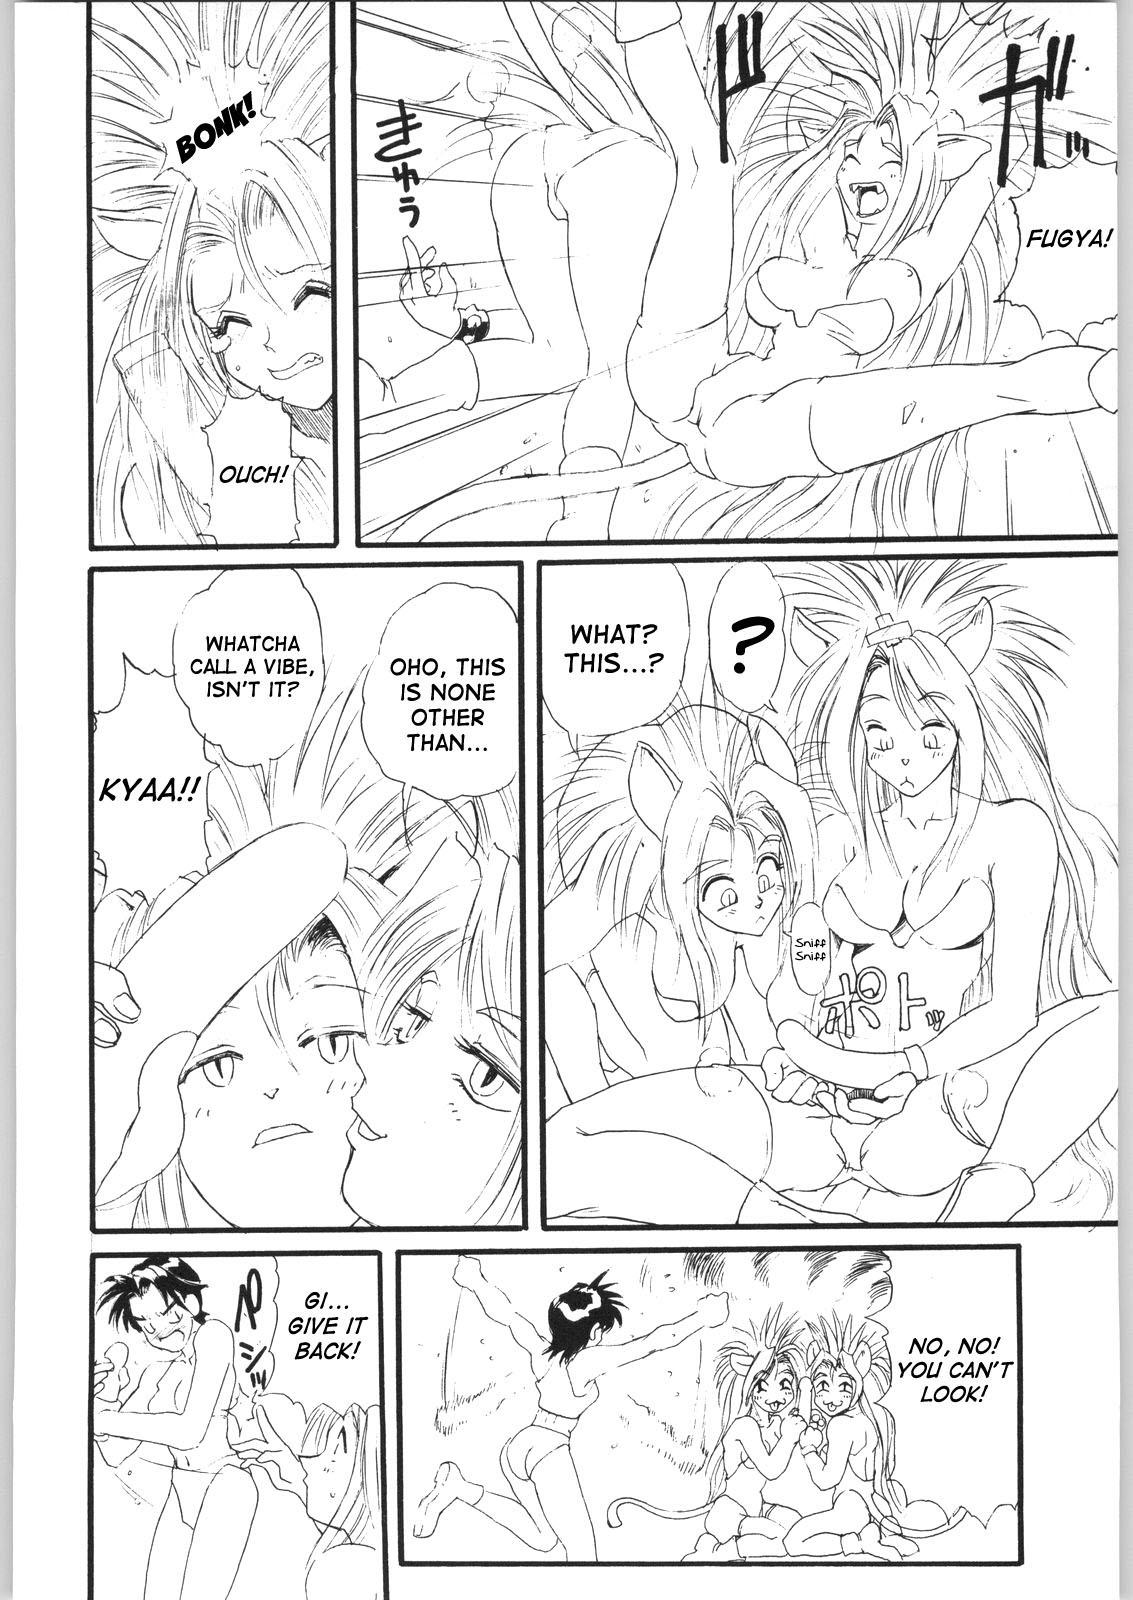 Man Close Up Gendai: Remedial Leona - Dominion tank police Cum Eating - Page 5